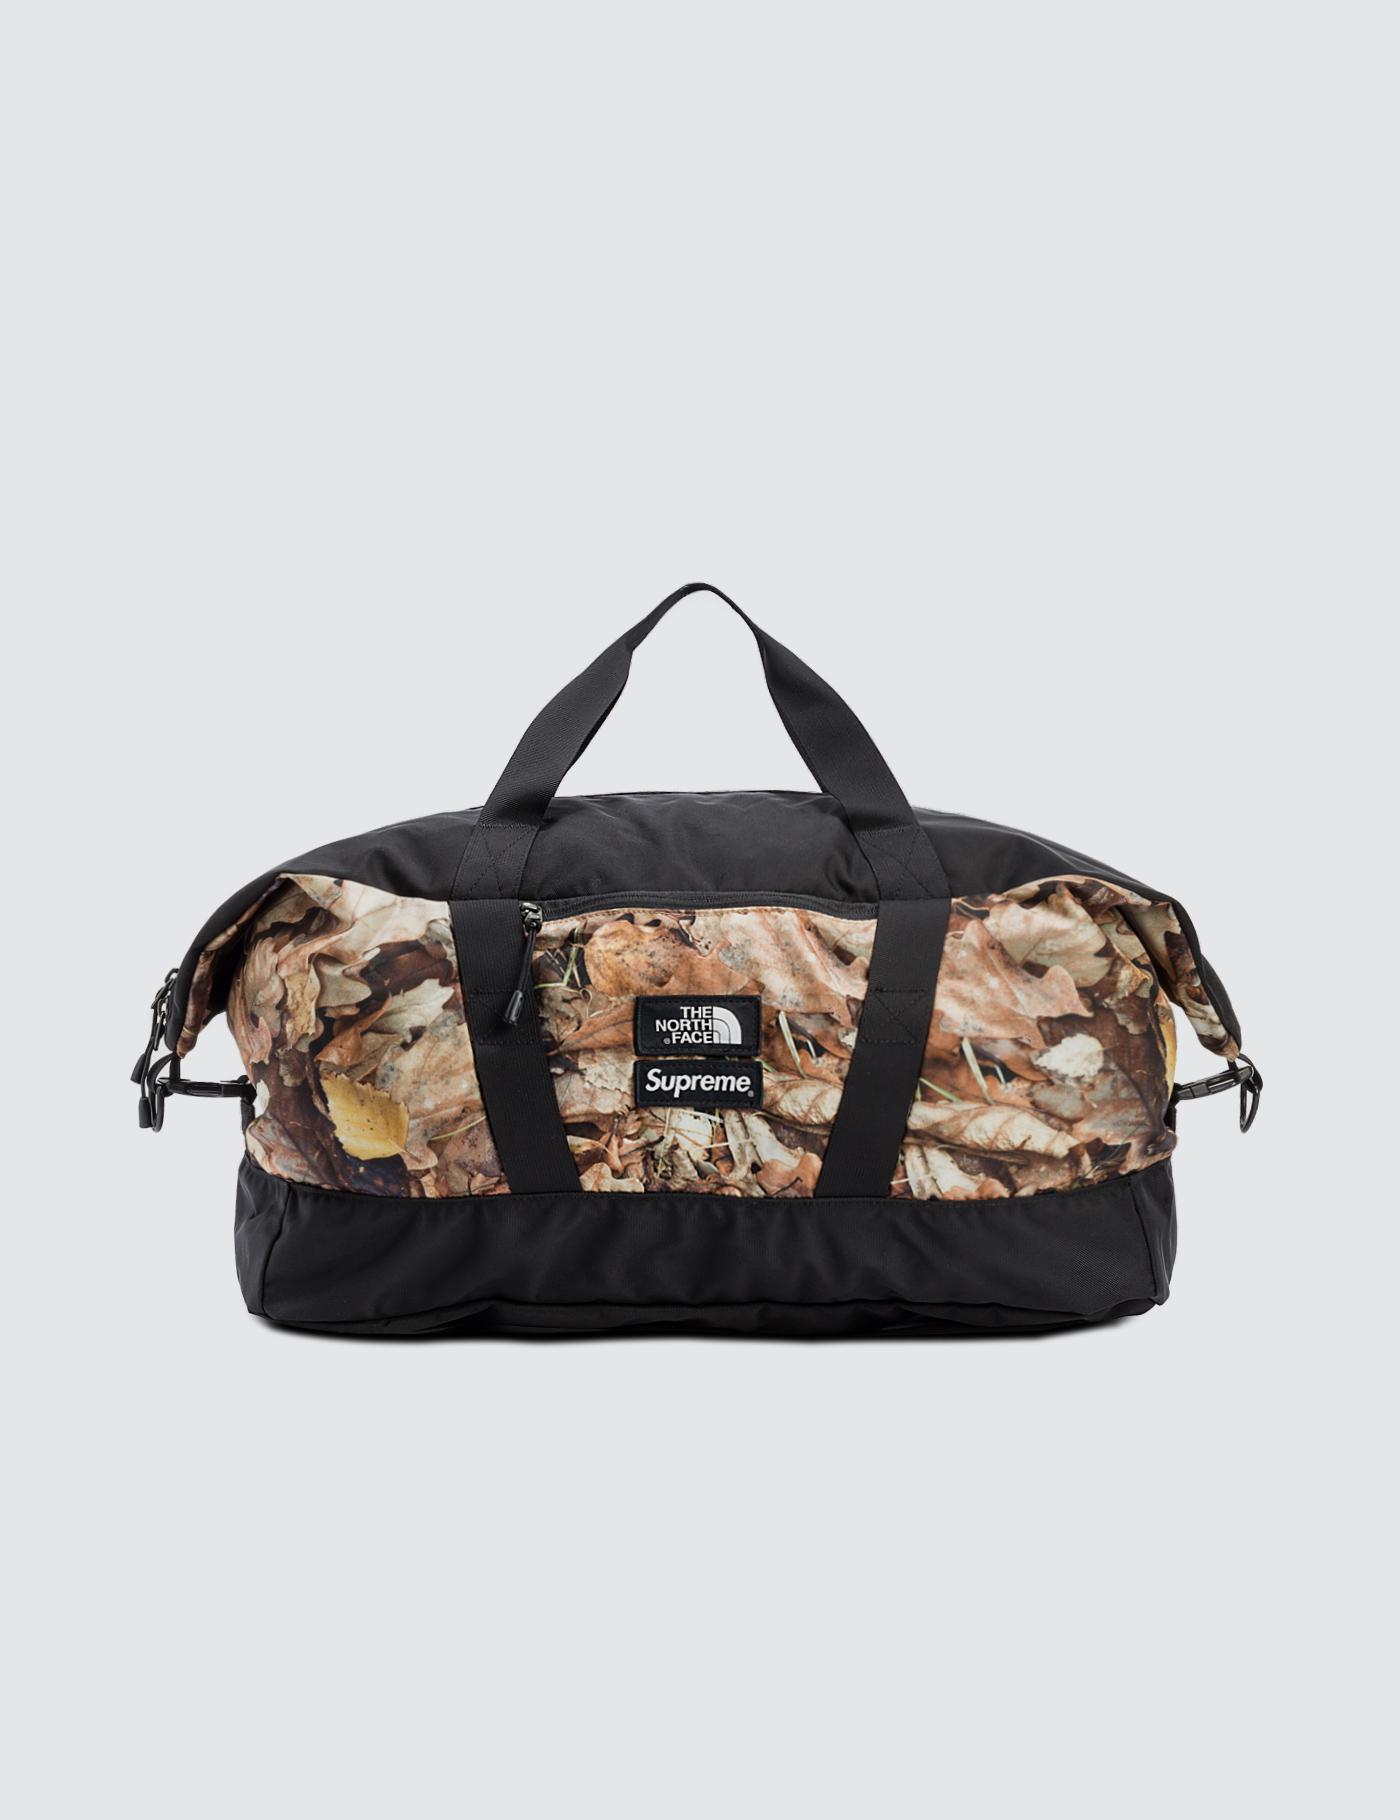 The North Face X Supreme Duffle Bag "Tree Camo" by SUPREME